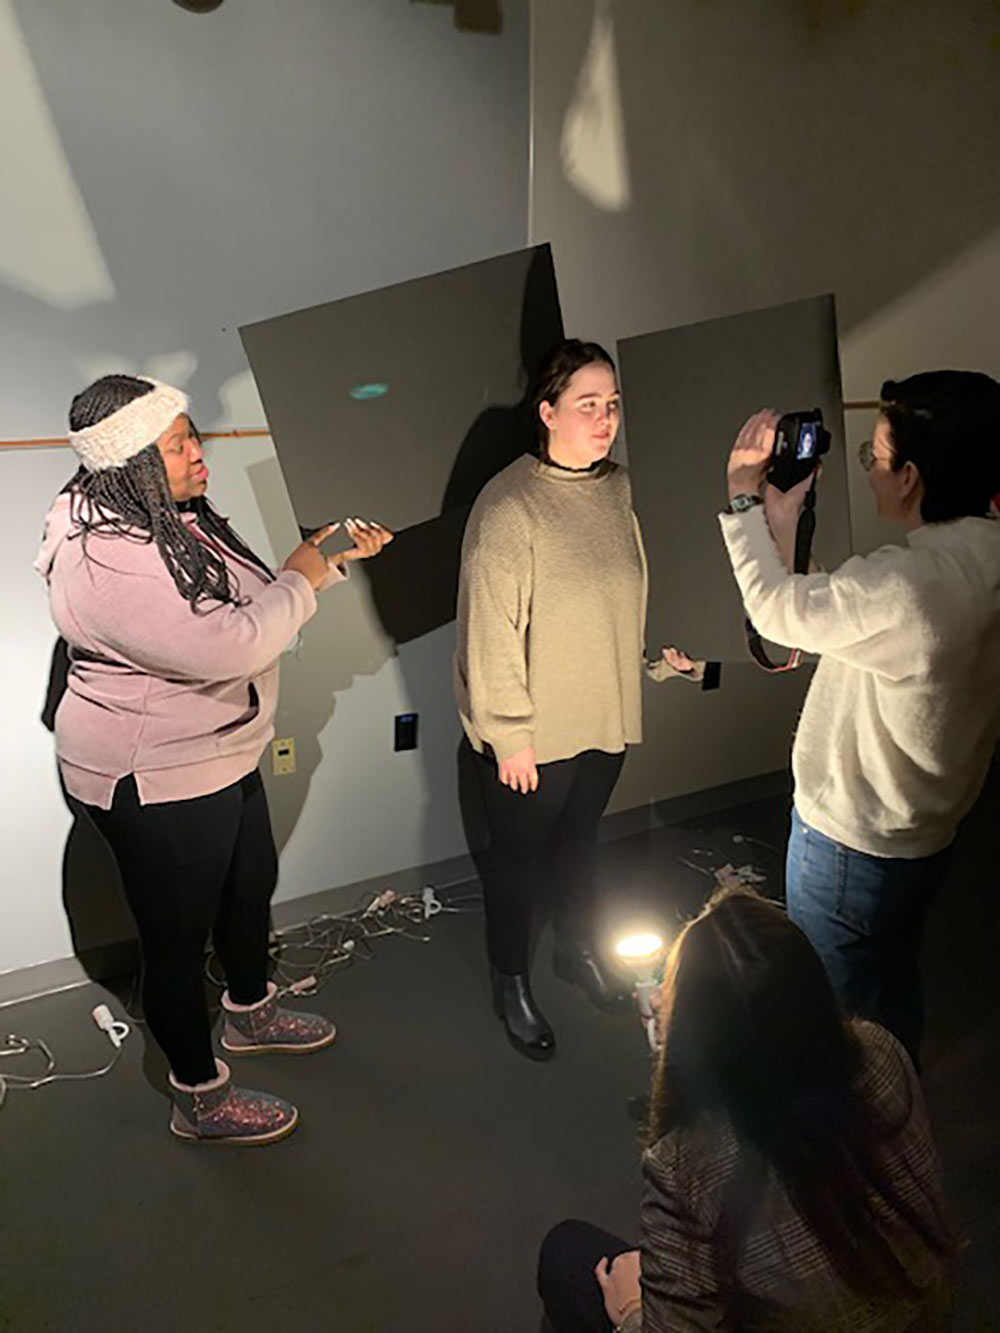 4 students shown in small space with lights. One students is taking a photo